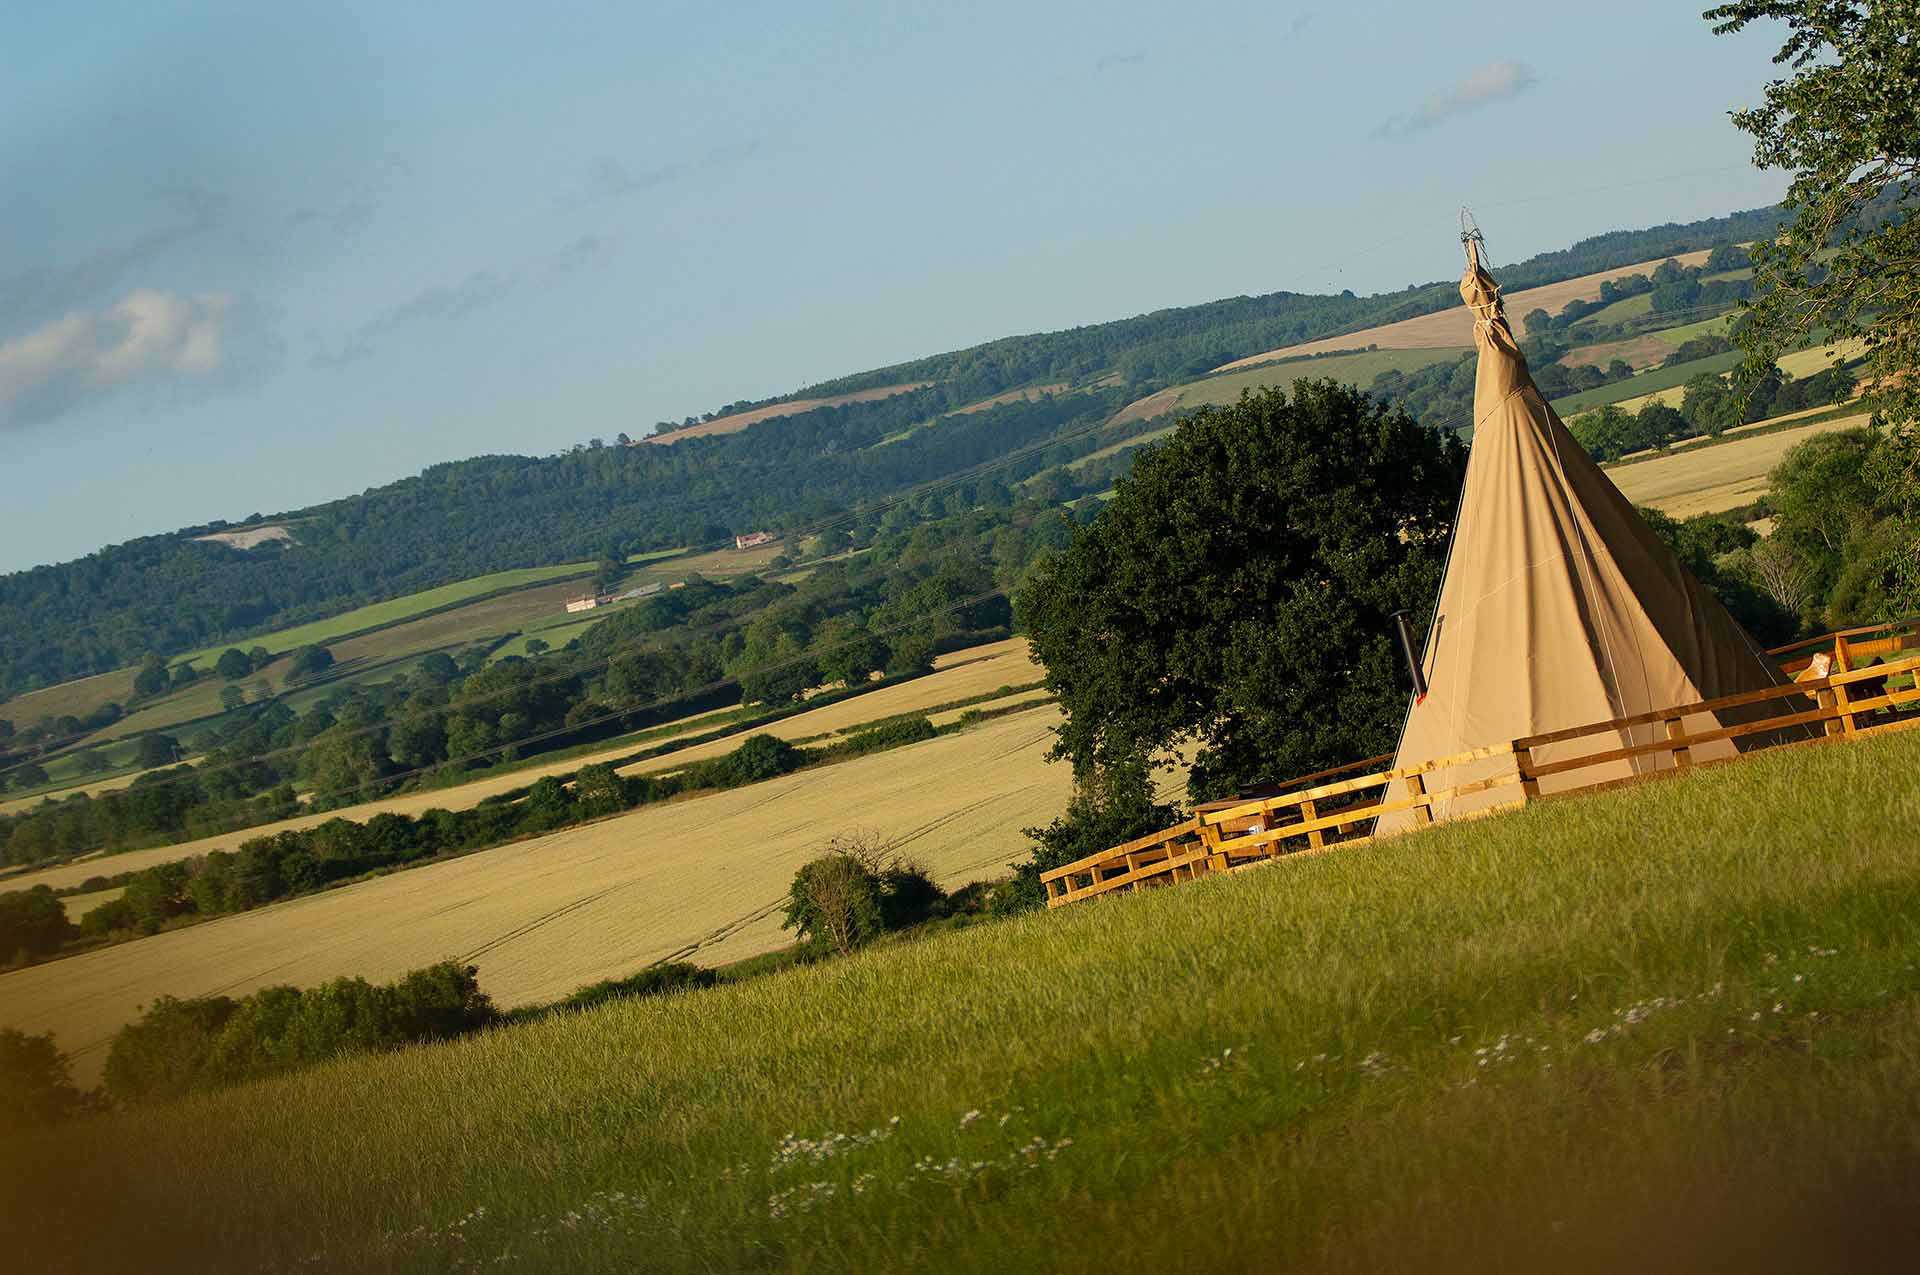 Geronimo tipi over looking White Horse